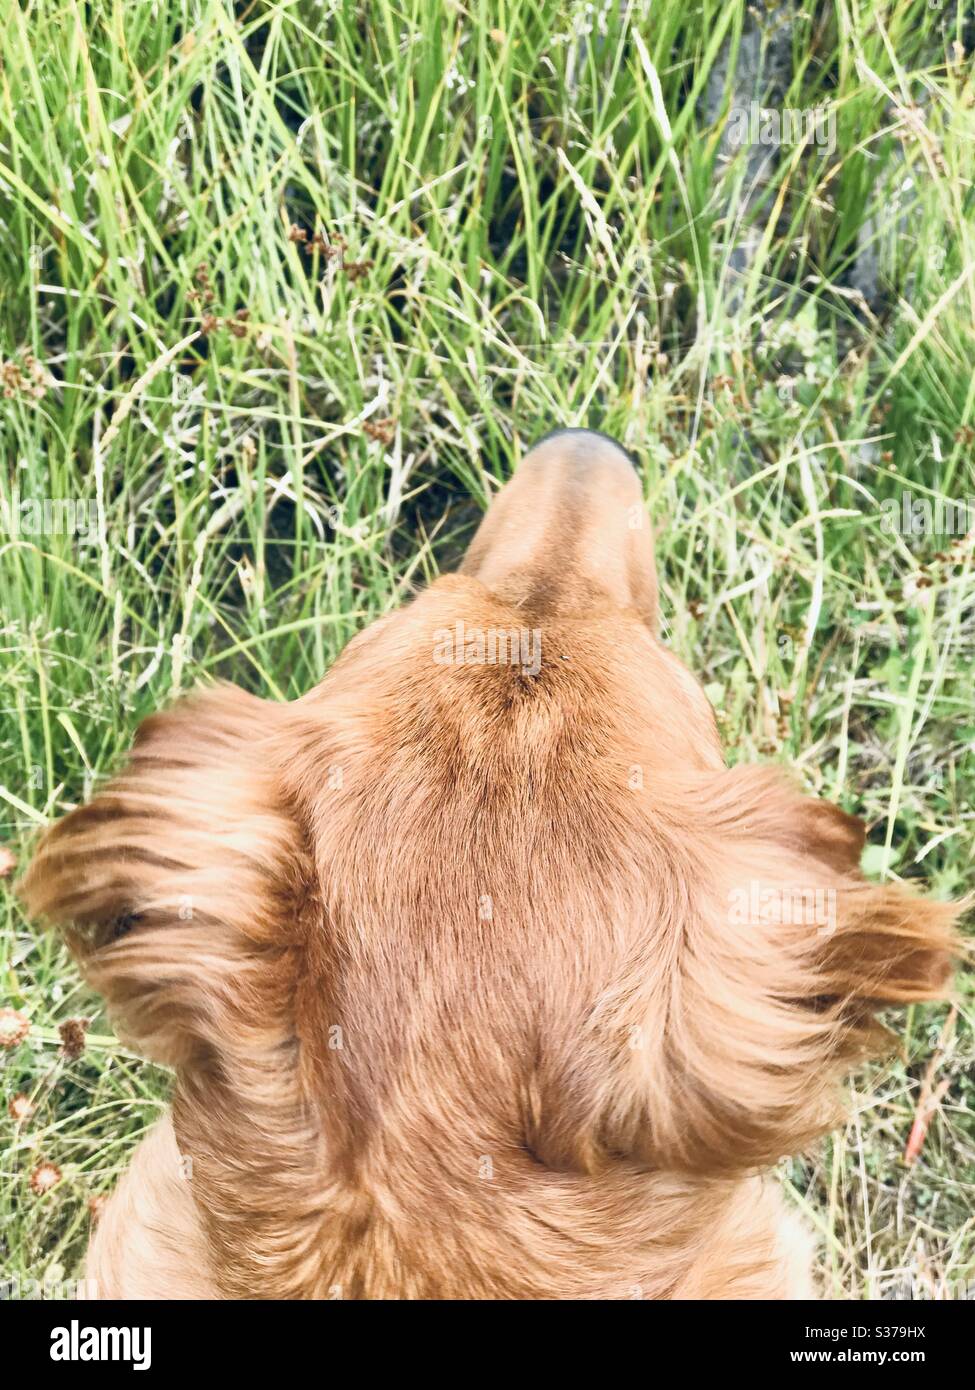 An aerial view of a golden retrievers head sitting in long green grass. Stock Photo